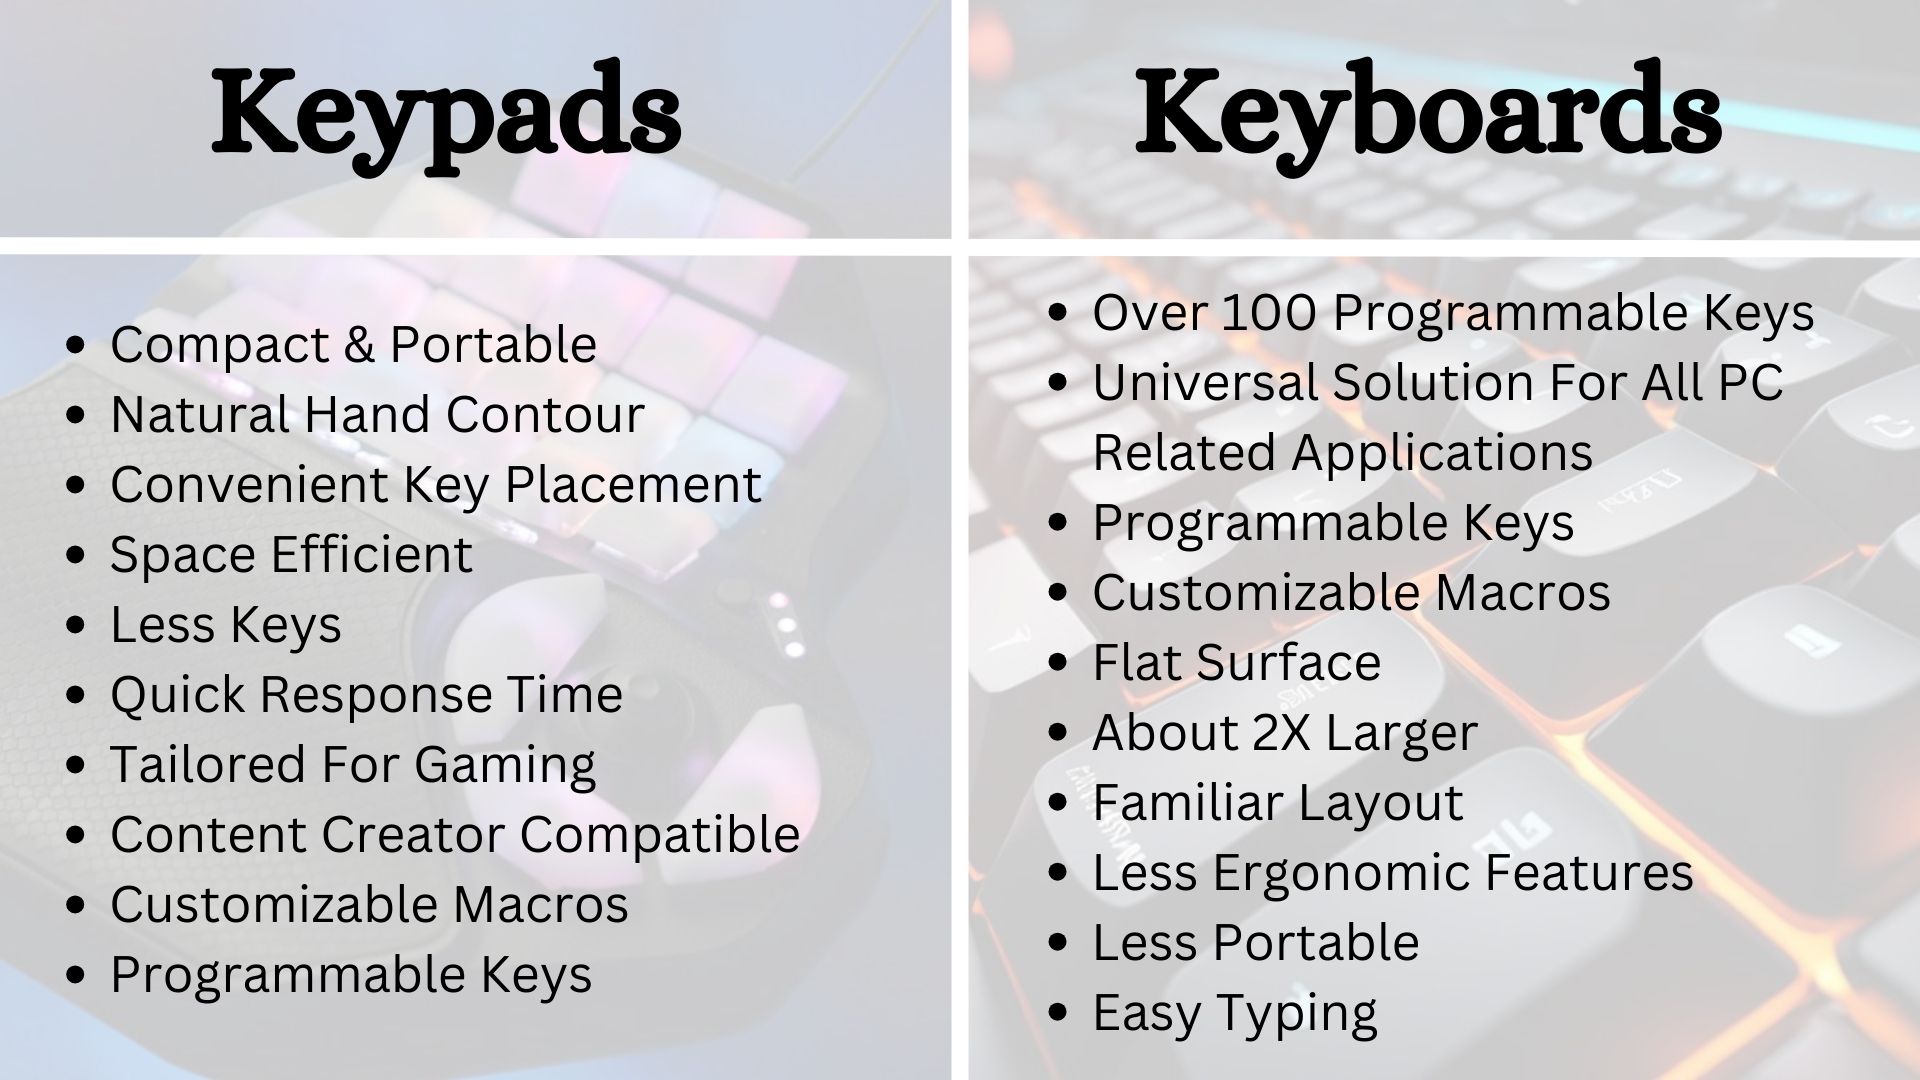 The side-by-side comparison of gaming keypads versus gaming keyboards explains how keypads are a competitive choice. Keypads are more compact, portable, comfortable, and have easier access to important key commands.